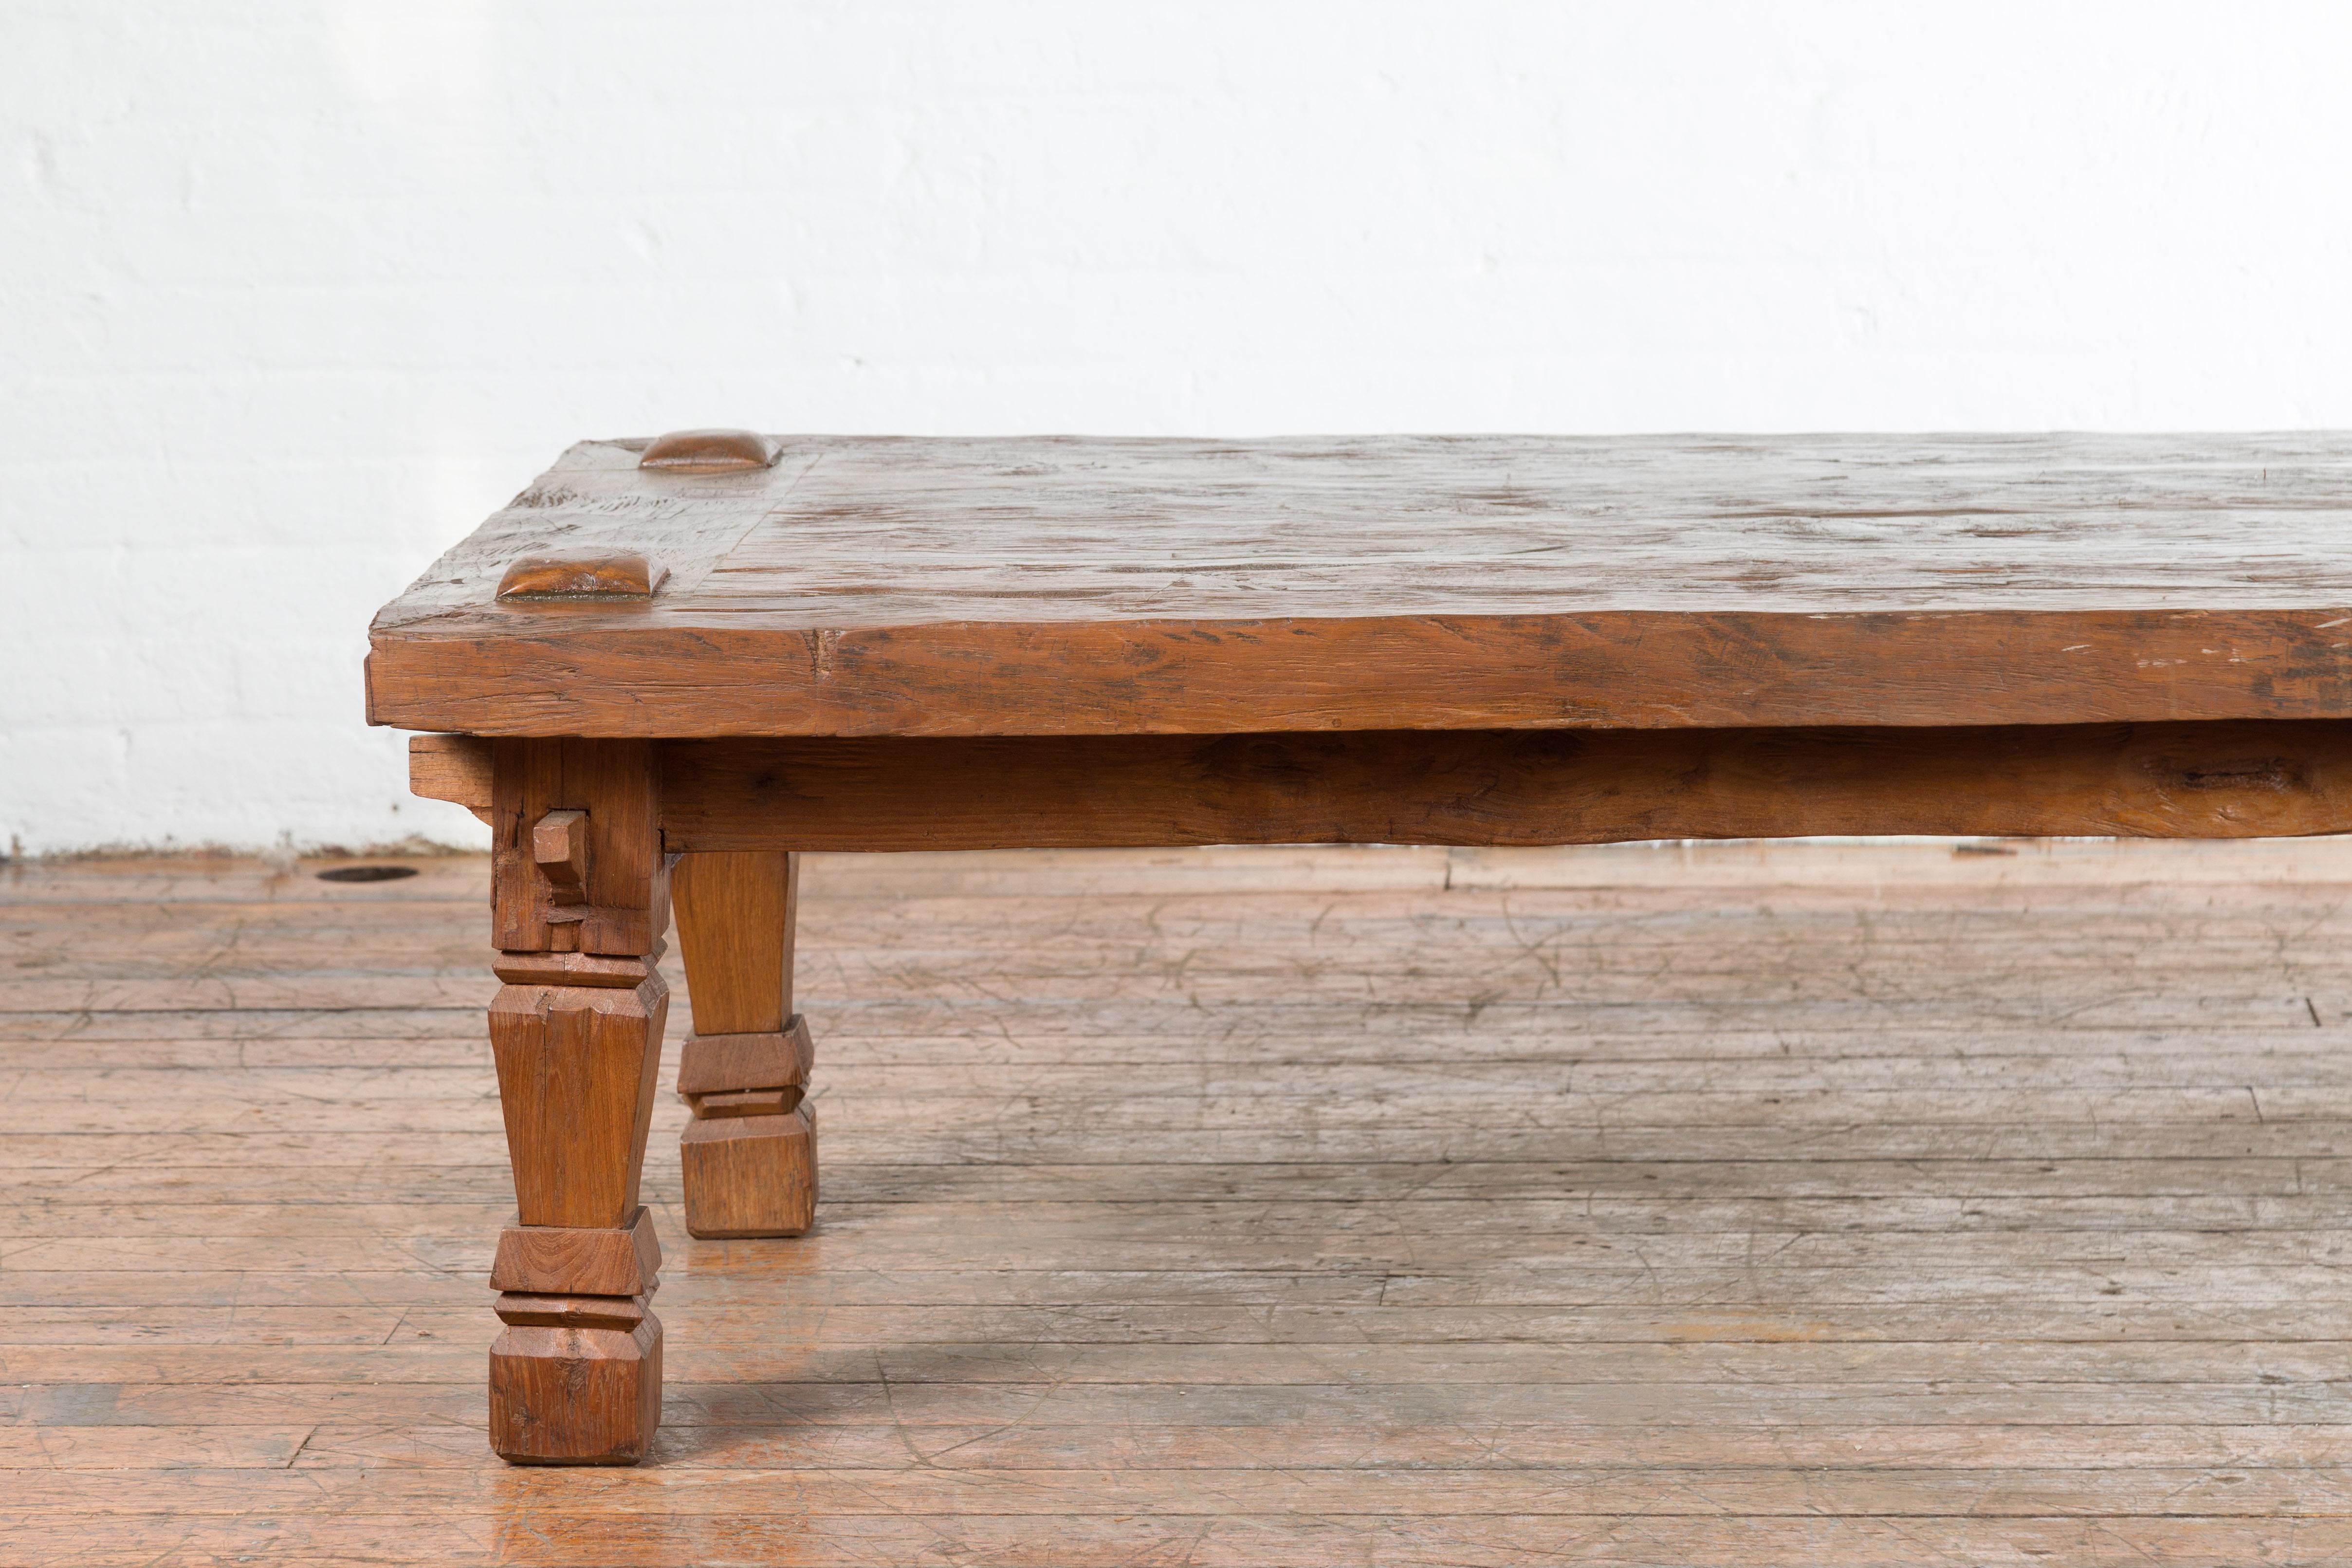 19th Century Indonesian Madurese Coffee Table with Carved Legs and Raised Joints In Good Condition For Sale In Yonkers, NY